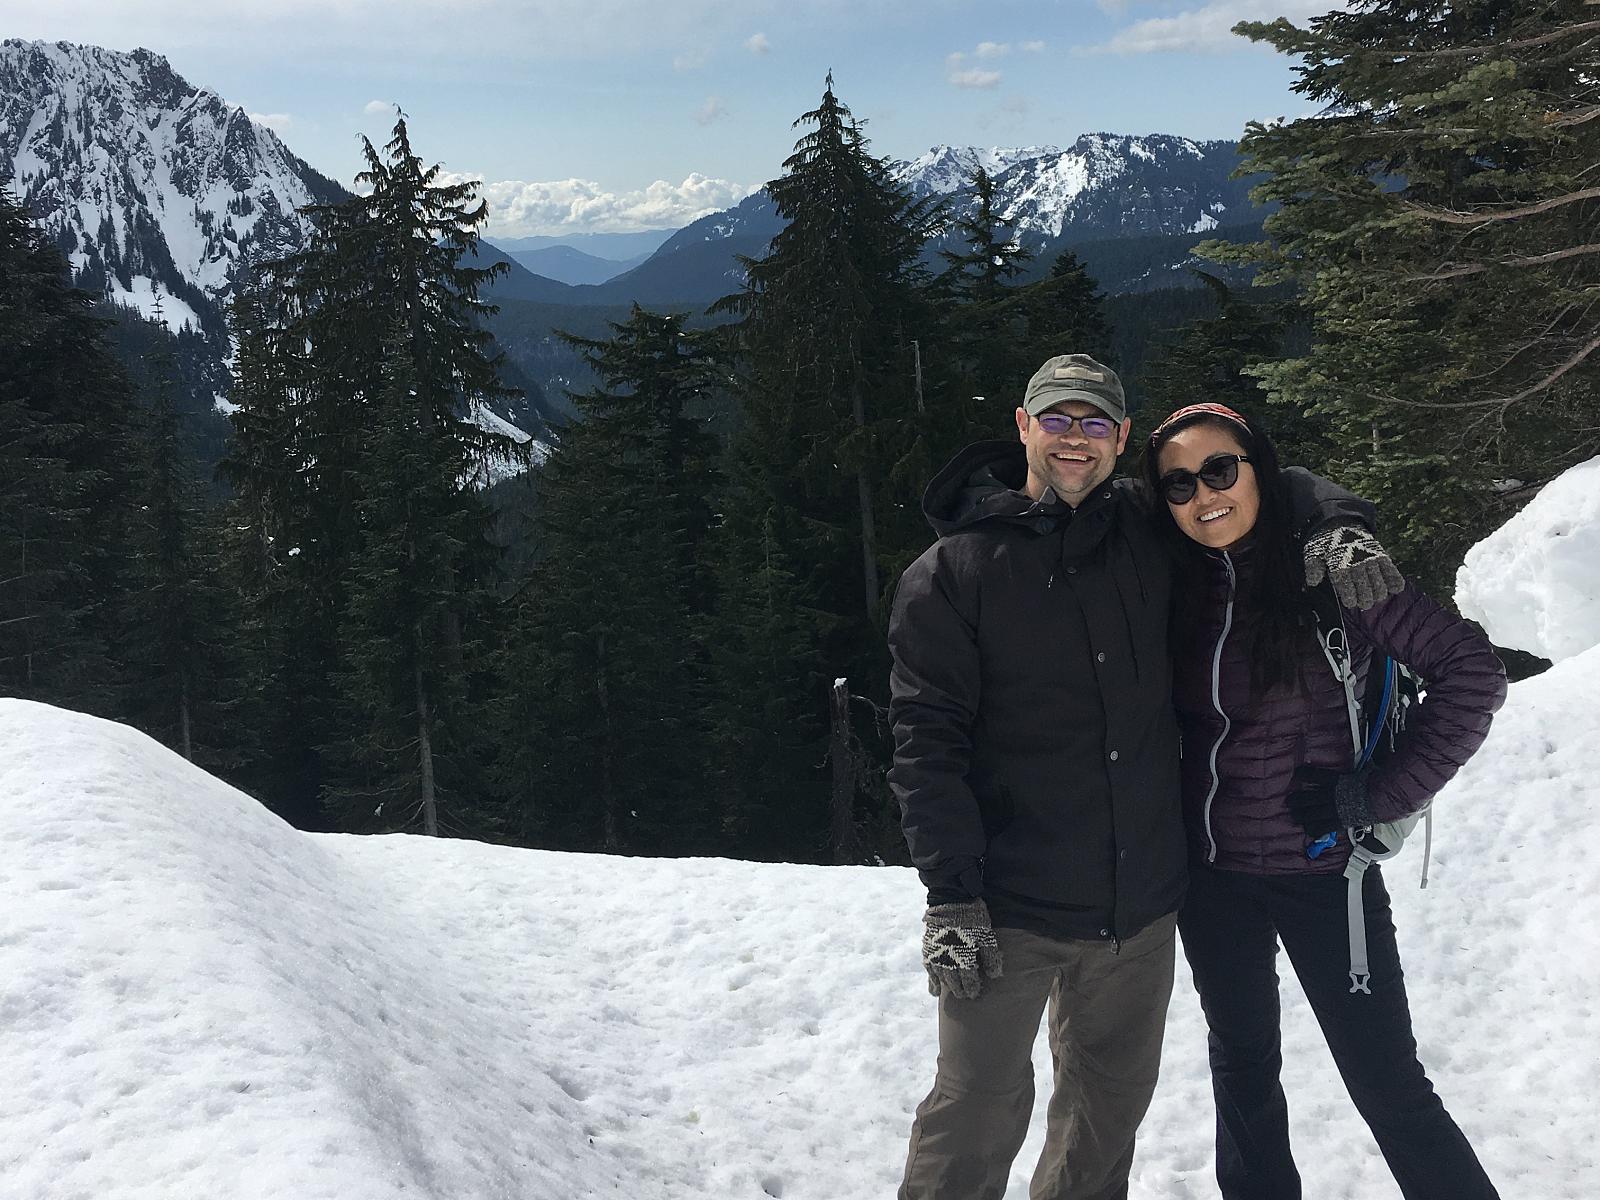 Peter with his arm around Ru in a picture of them on a snowy mountain top during a trip.